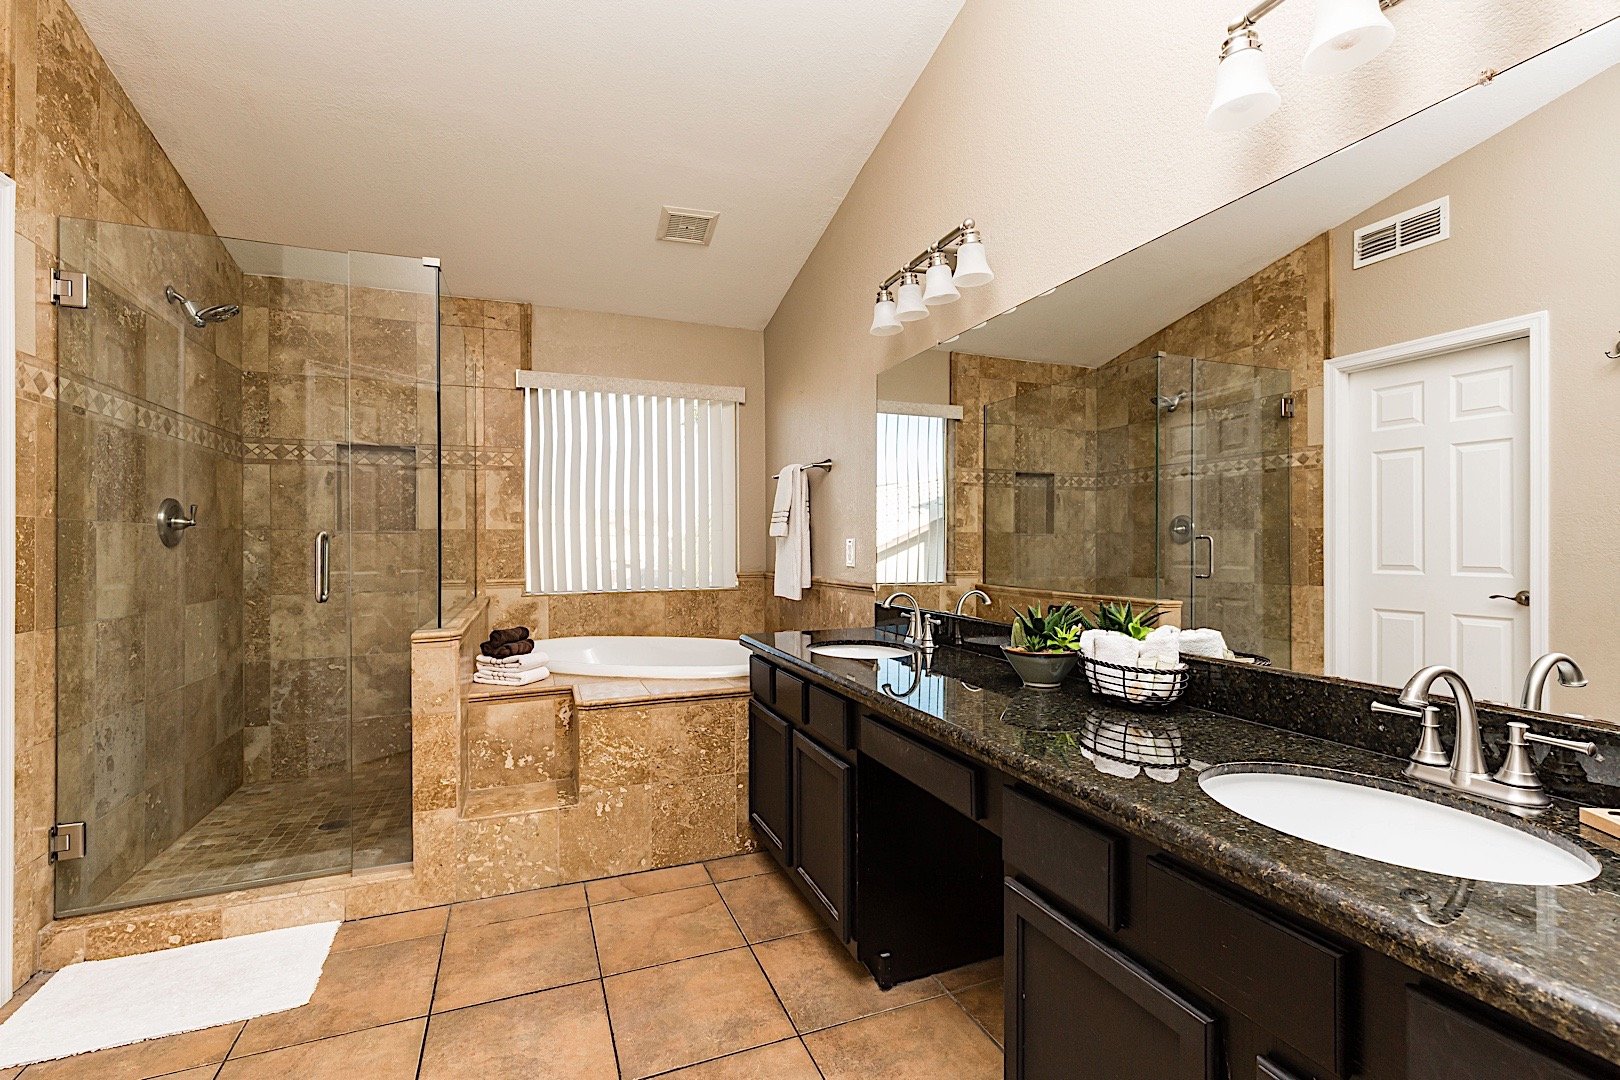 Relax in the oversized soaking tub